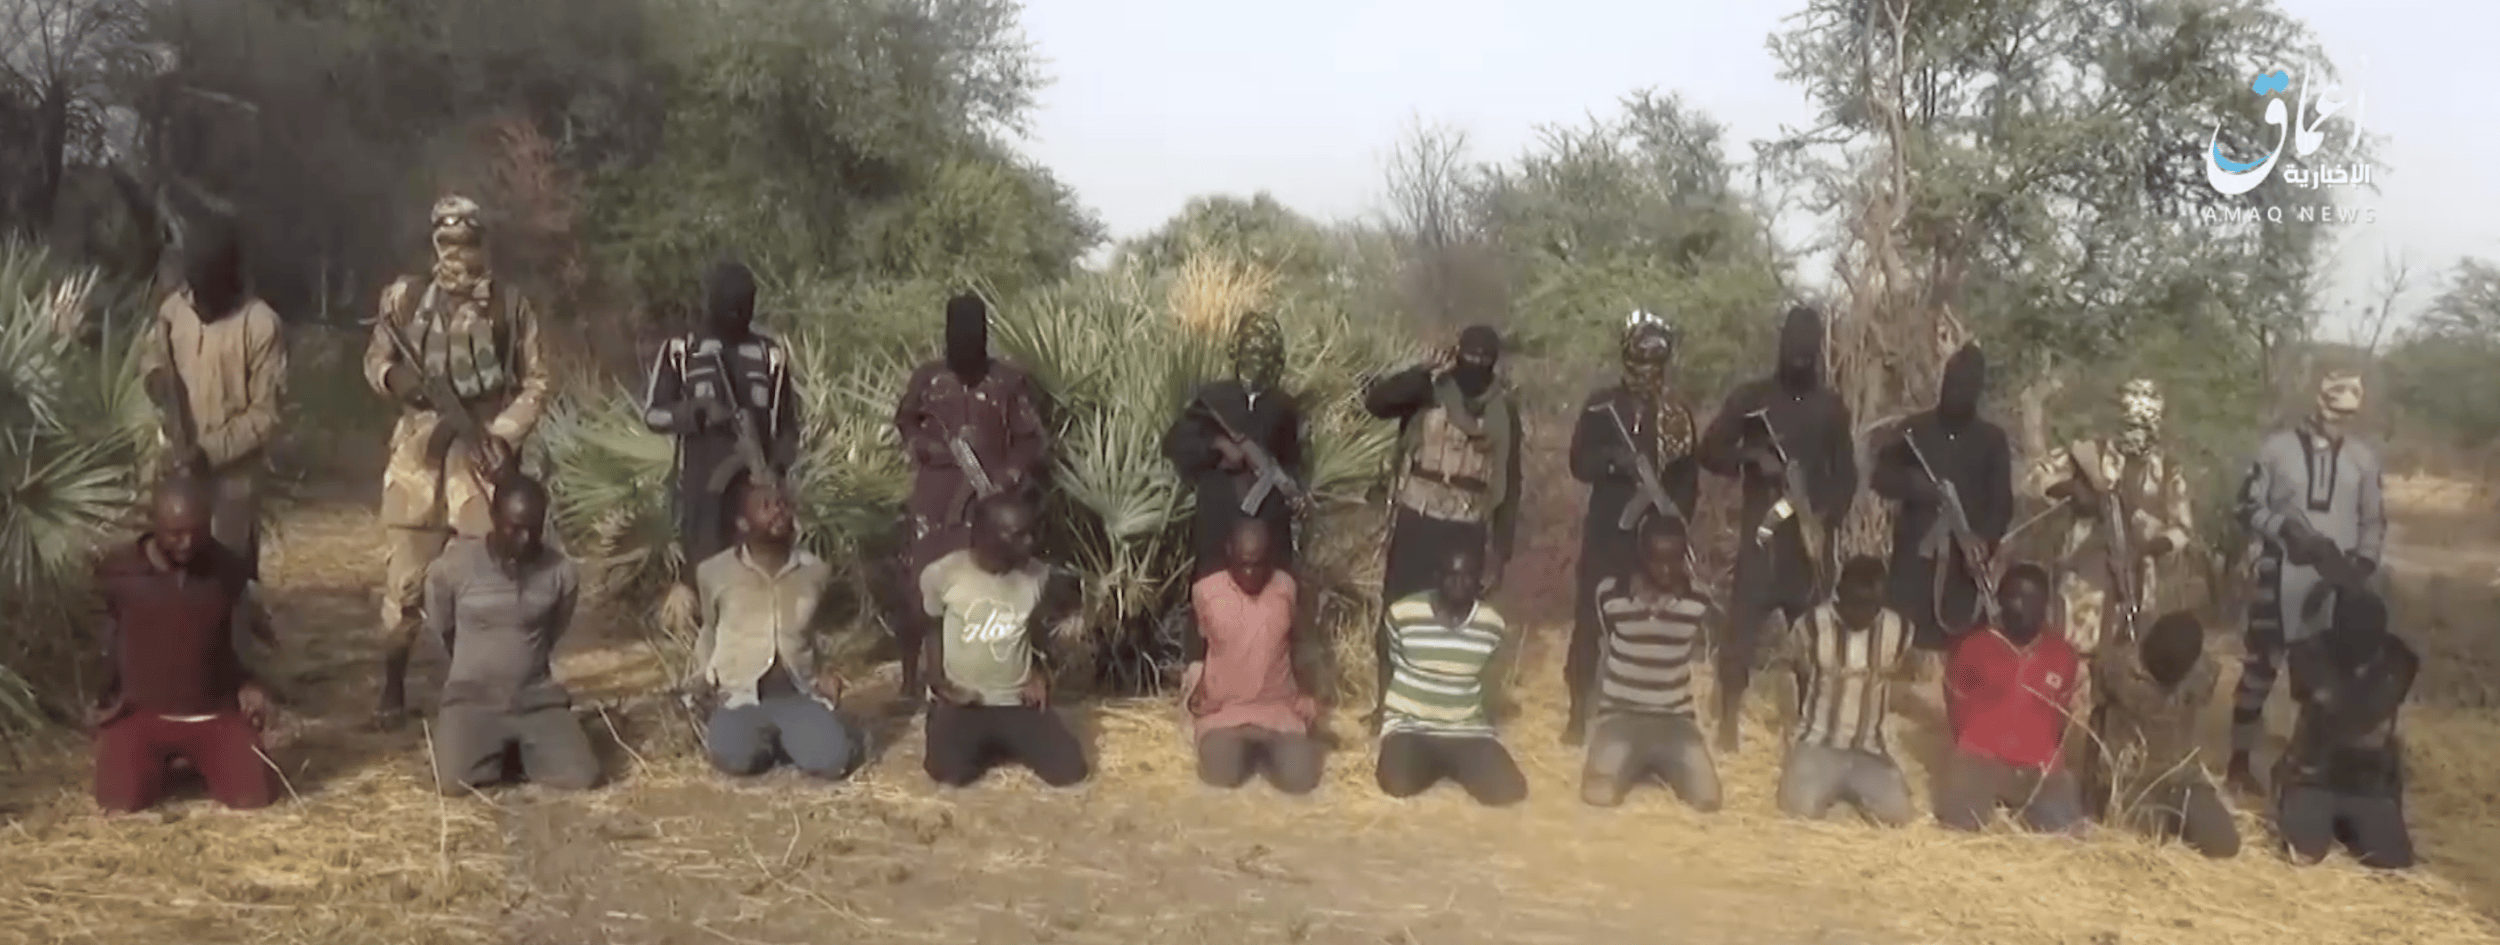 Islamic State West Africa (ISWA): Triple Execution of 20 Christians, Borno State, Nigeria - 10 May 2022